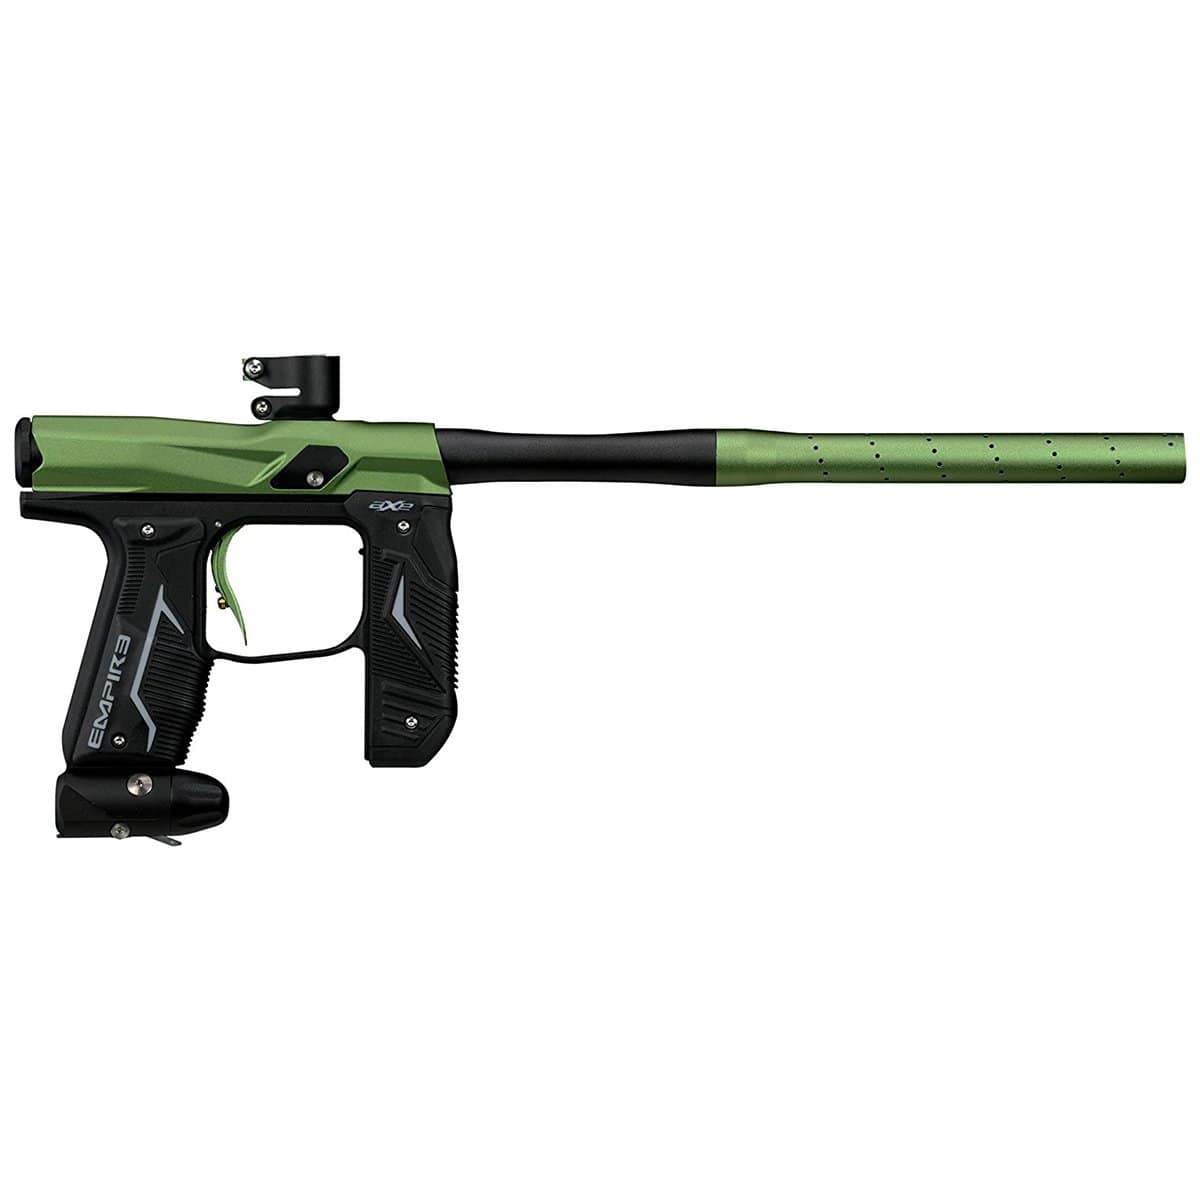 Empire Axe 2.0 Marker - Dust Black / Dust Green - Eminent Paintball And Airsoft